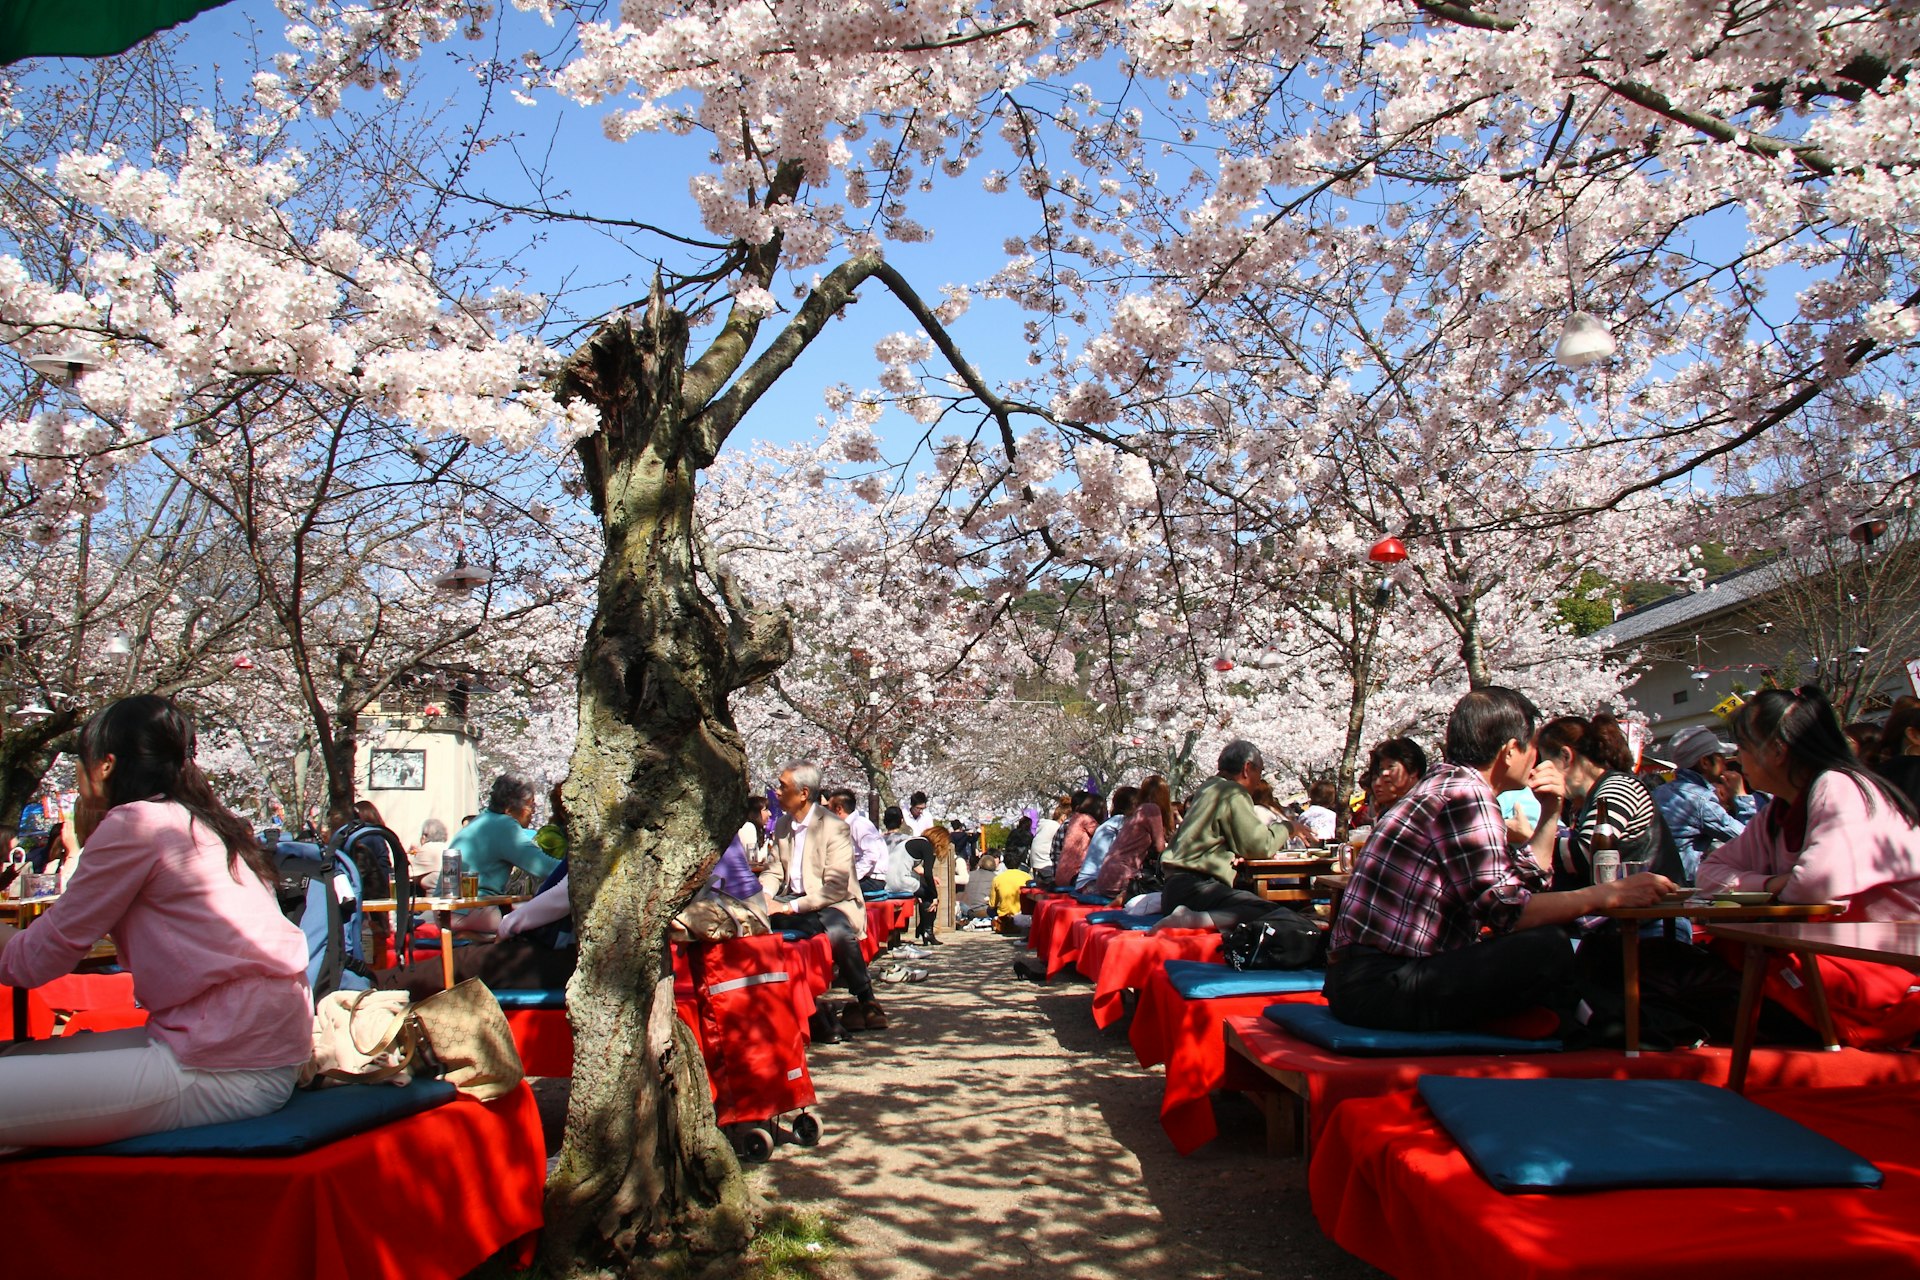 People sit at low tables under cherry blossom trees in a park